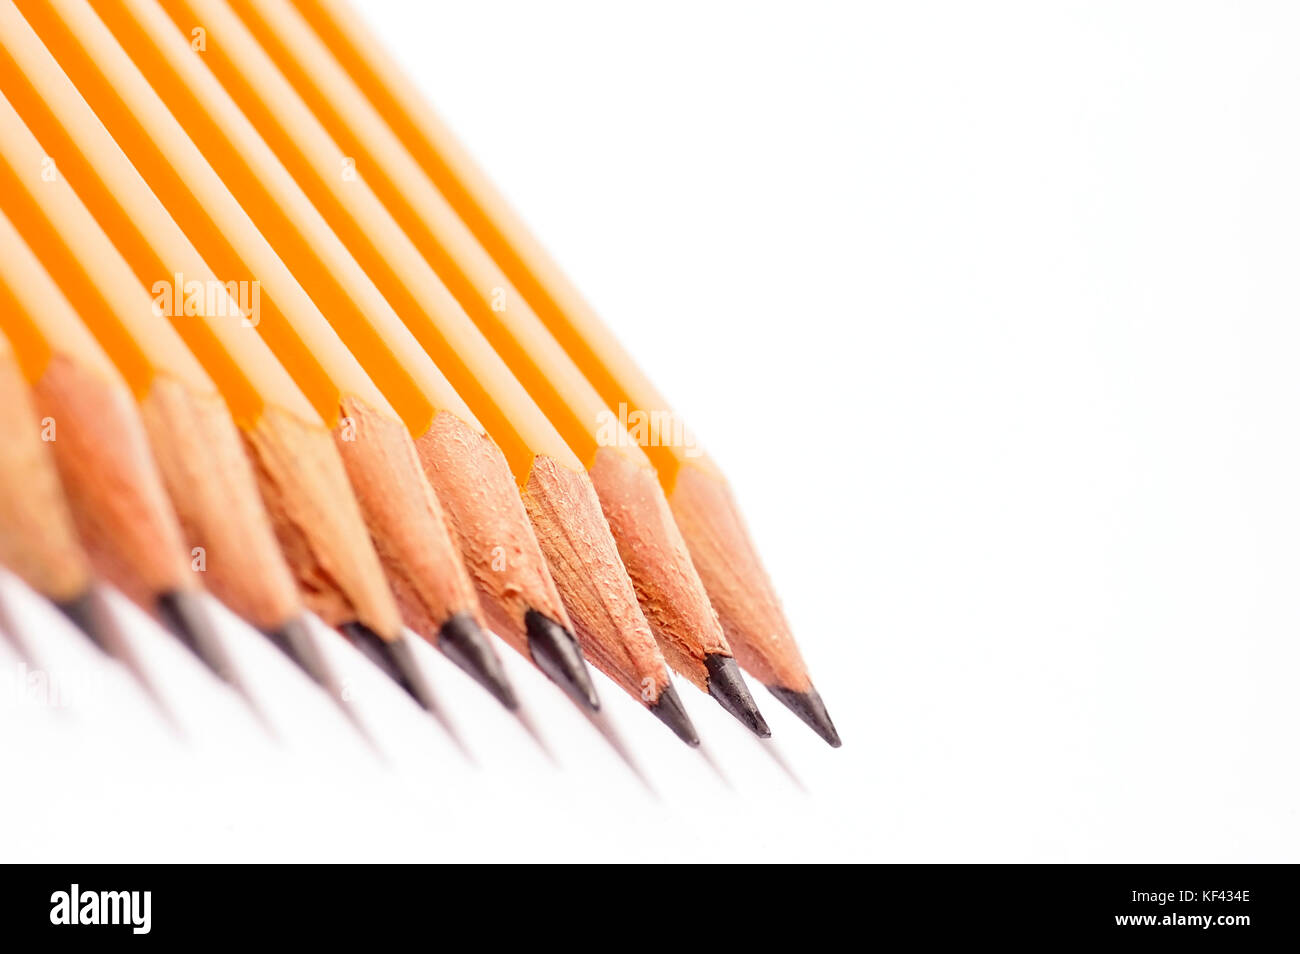 row of yellow drawing pencils isolated Stock Photo